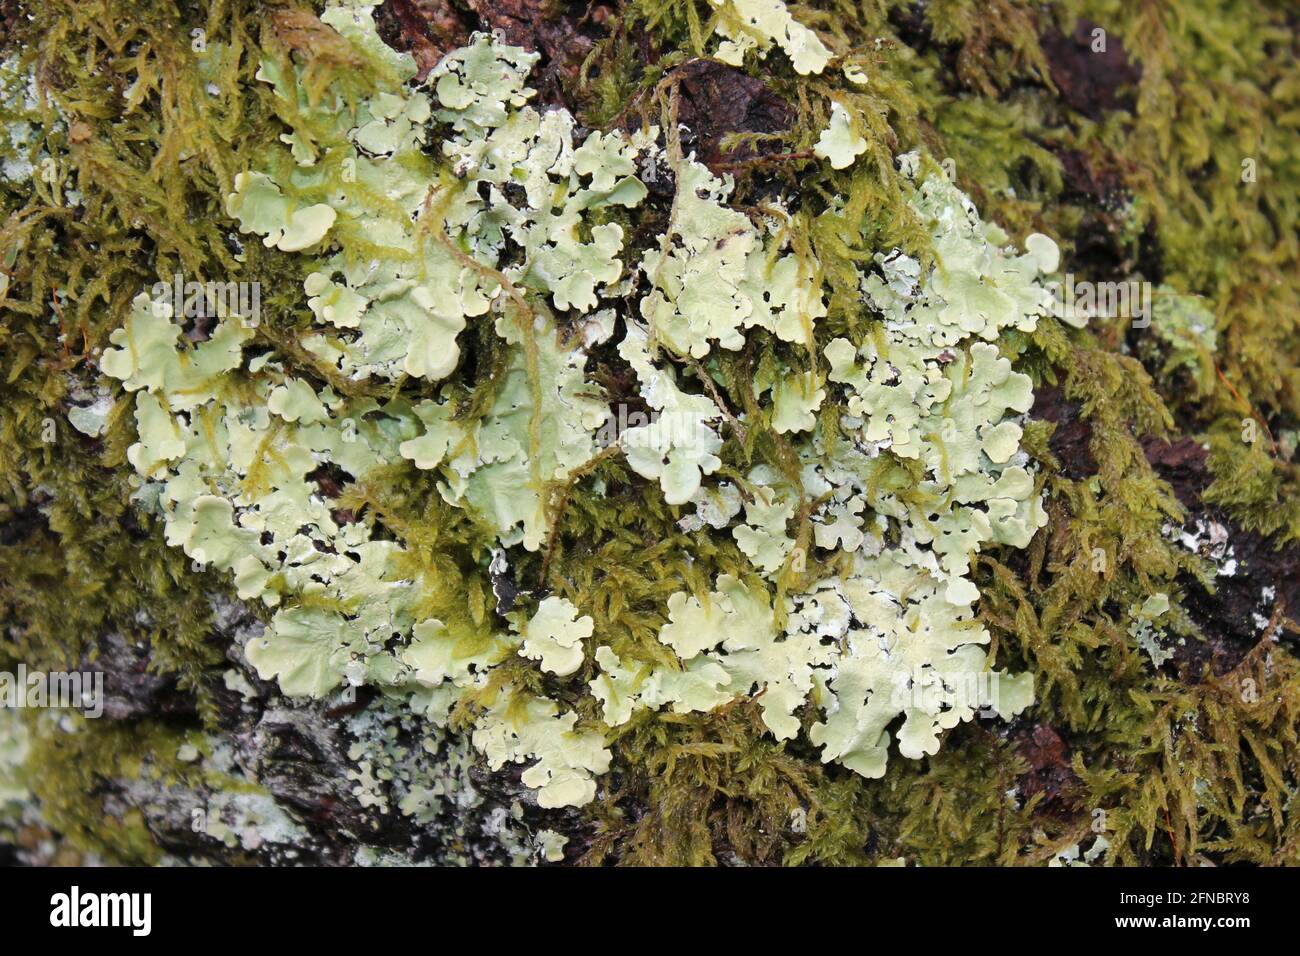 Lichen Growing On A Tree Trunk At Coedydd Aber National Nature Reserve, Gwynedd, Wales Stock Photo